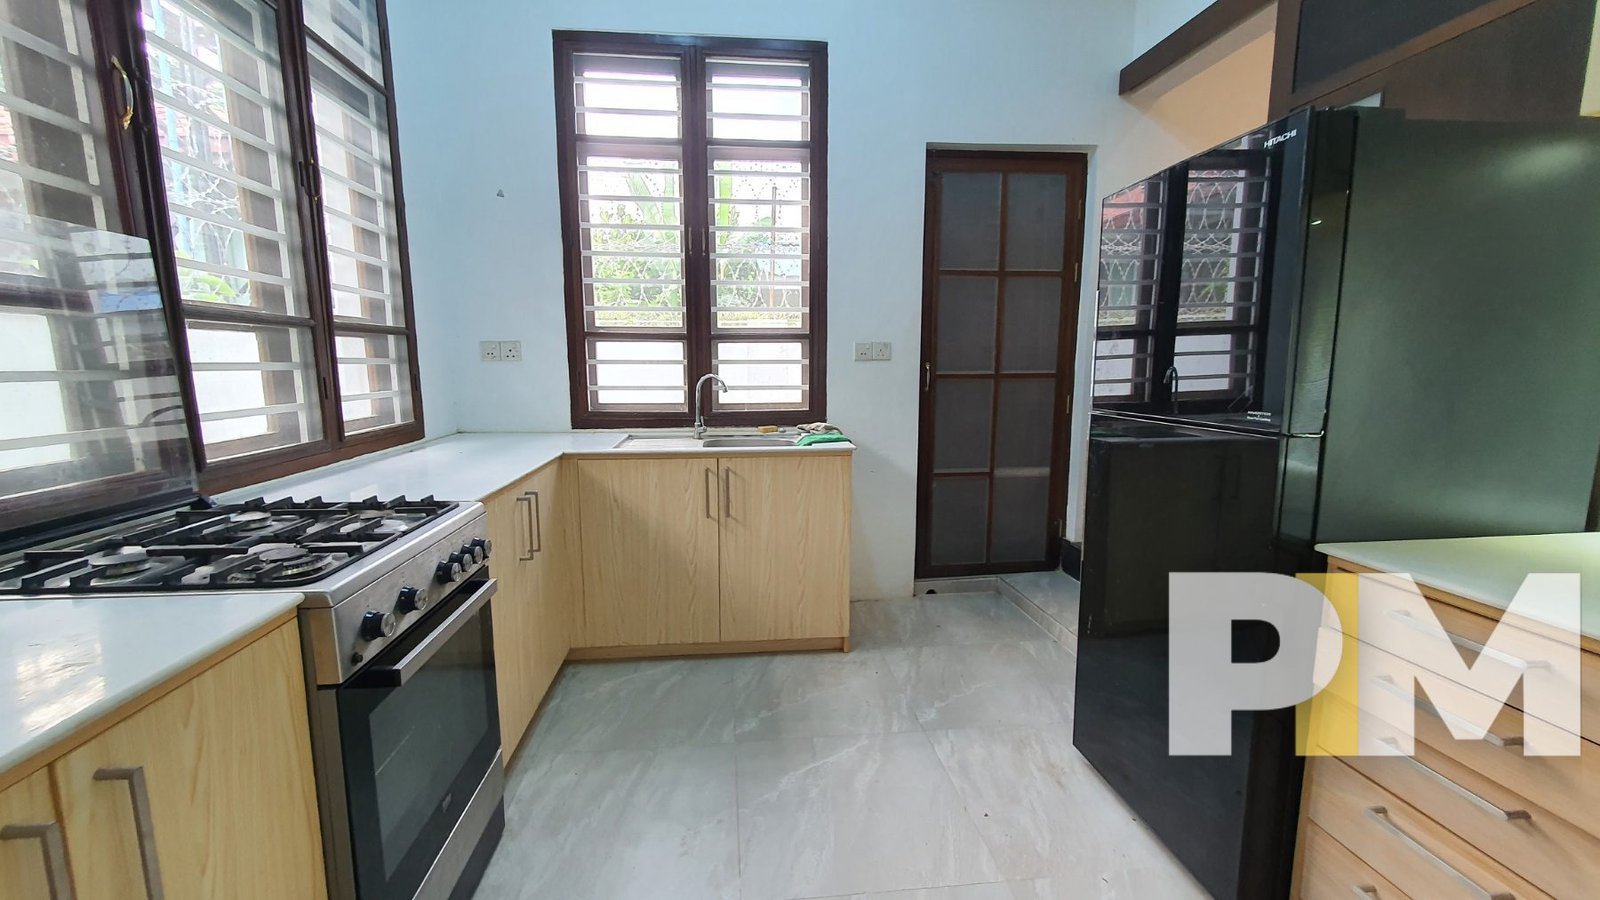 kitchen with oven - Yangon Real Estate